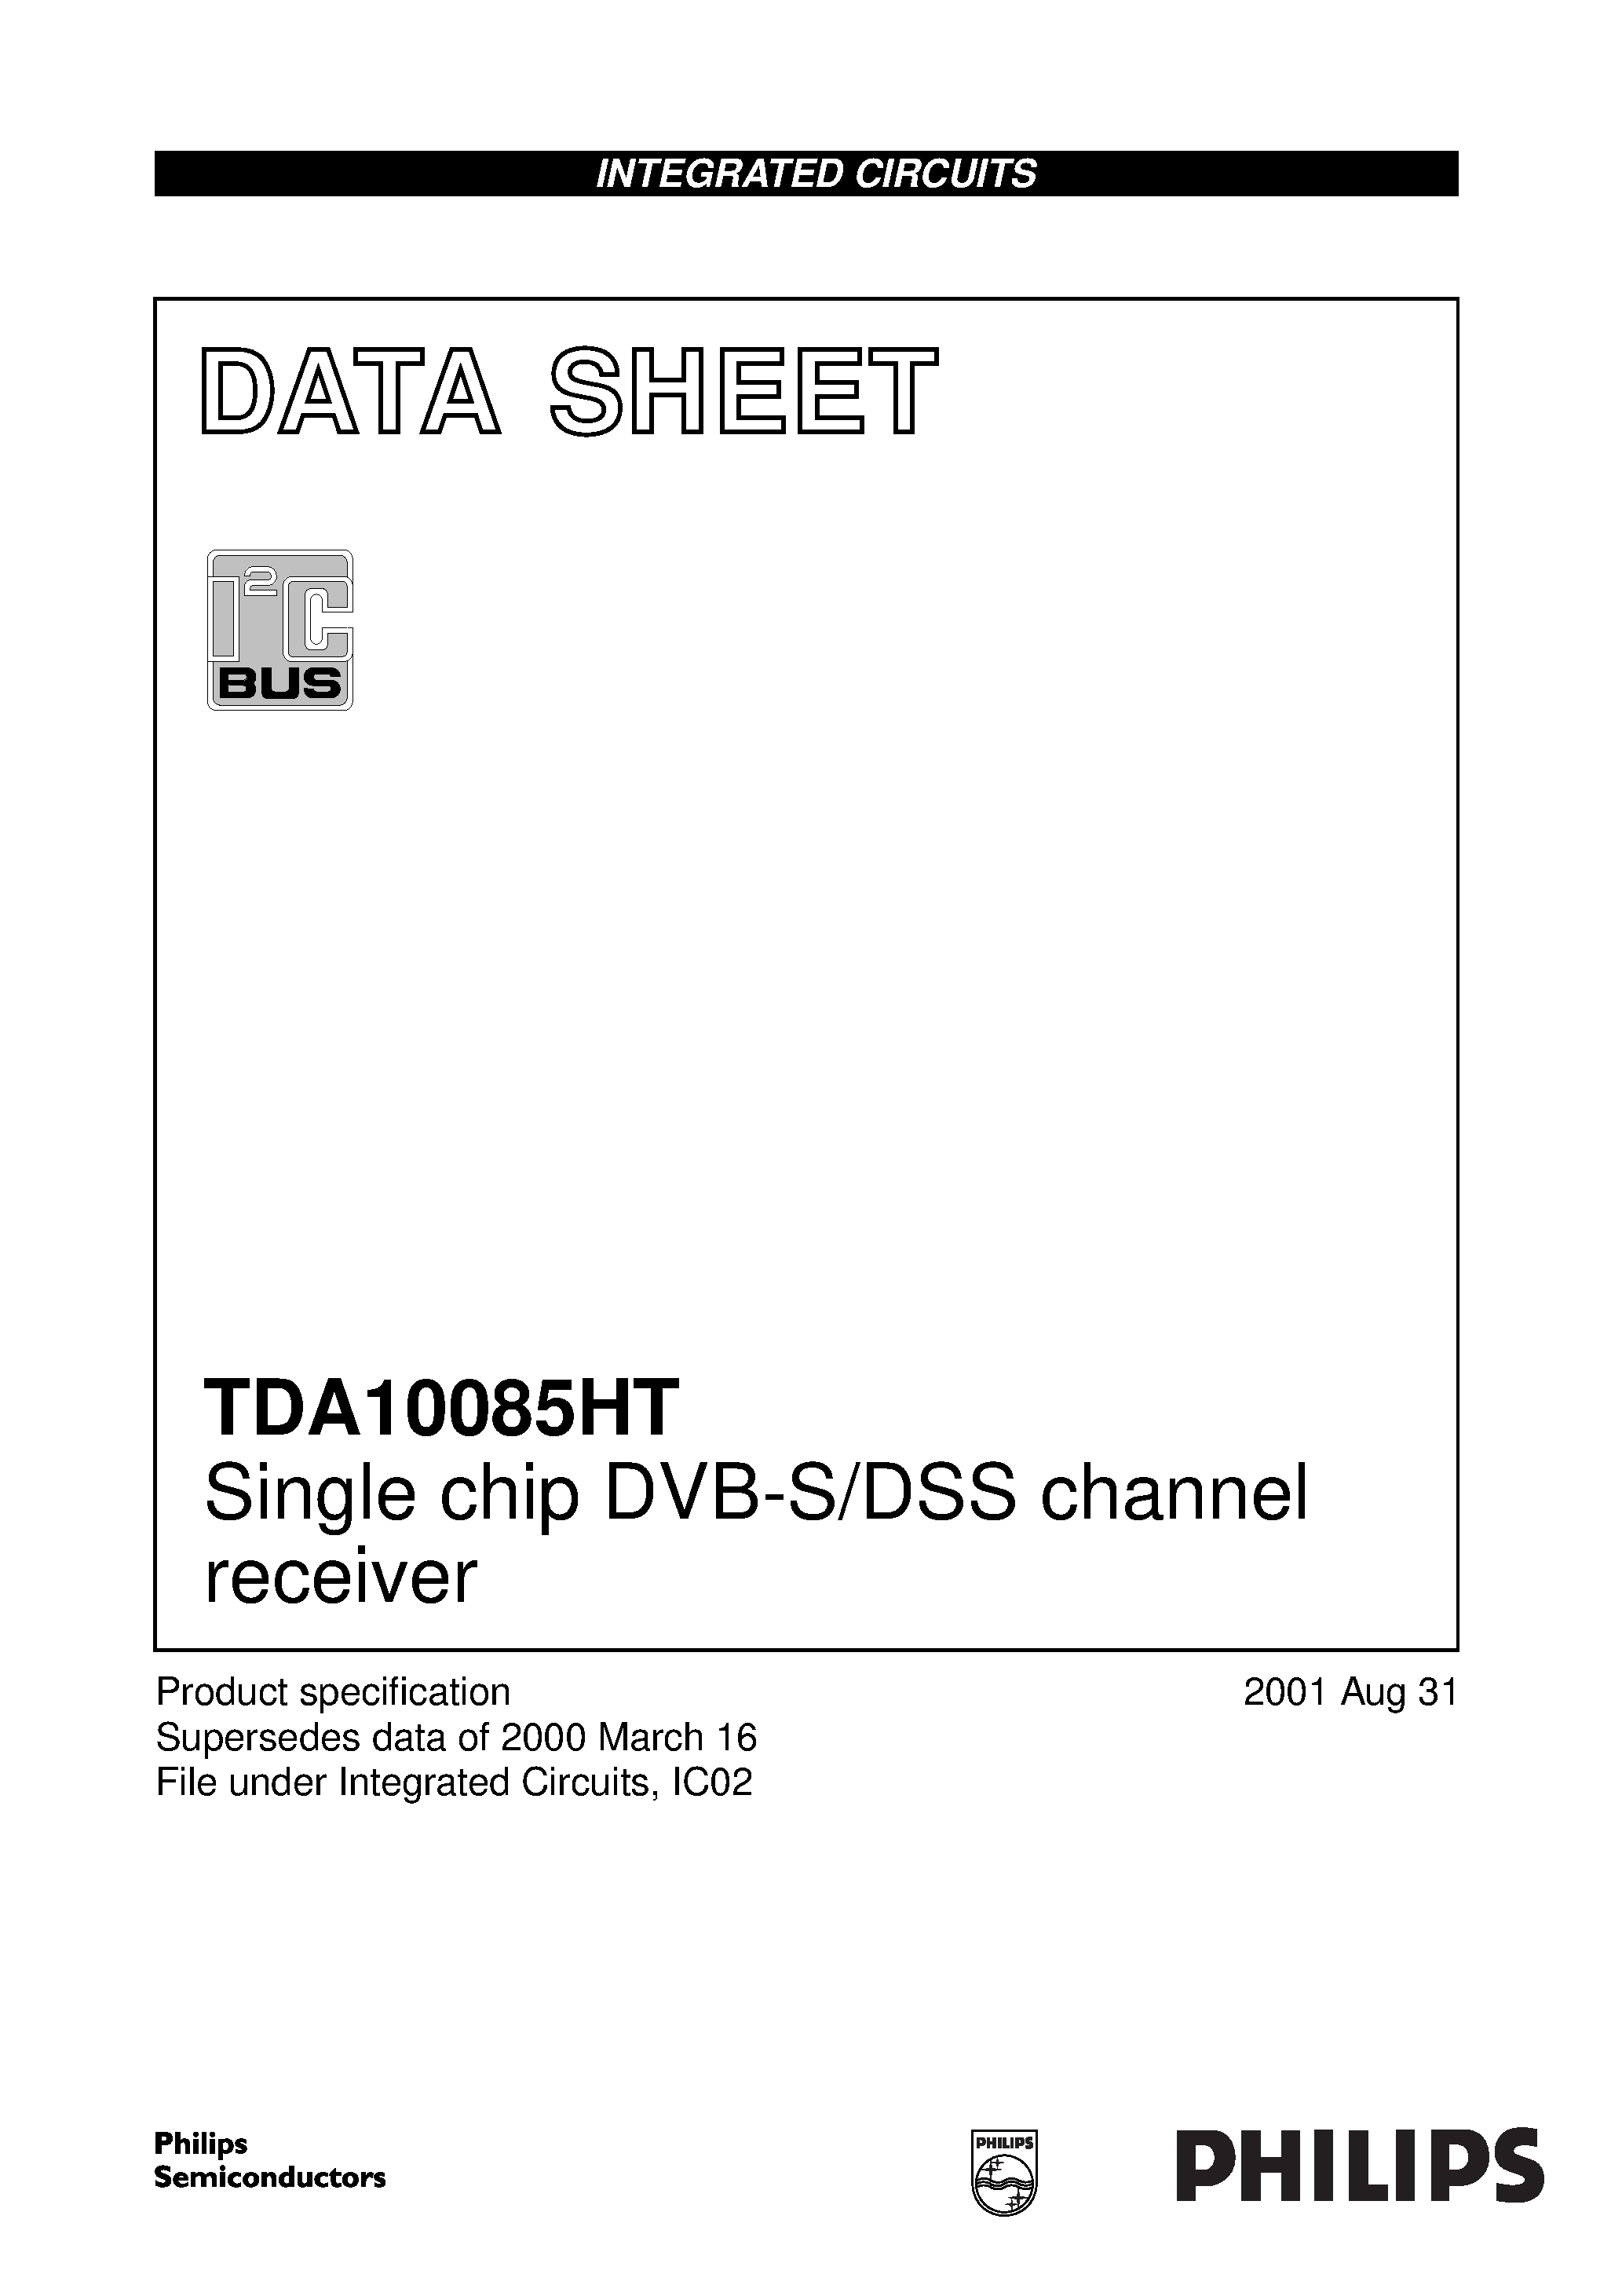 Datasheet TDA10085HT - Single chip DVB-S/DSS channel receiver page 1